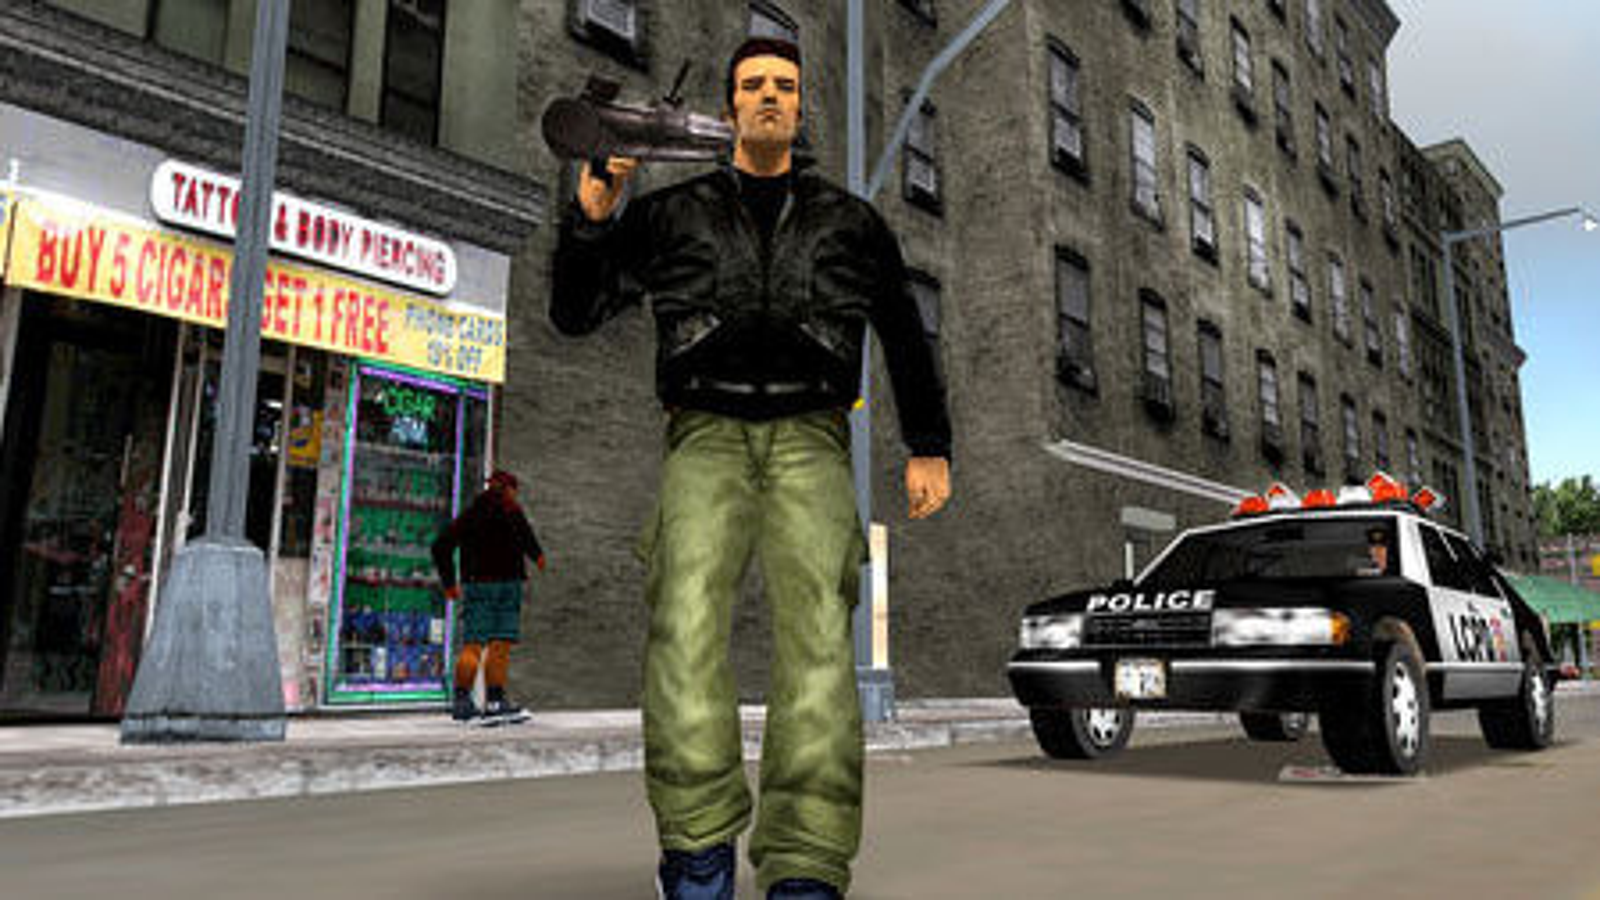 Grand Theft Auto III Now Available in the US App Store